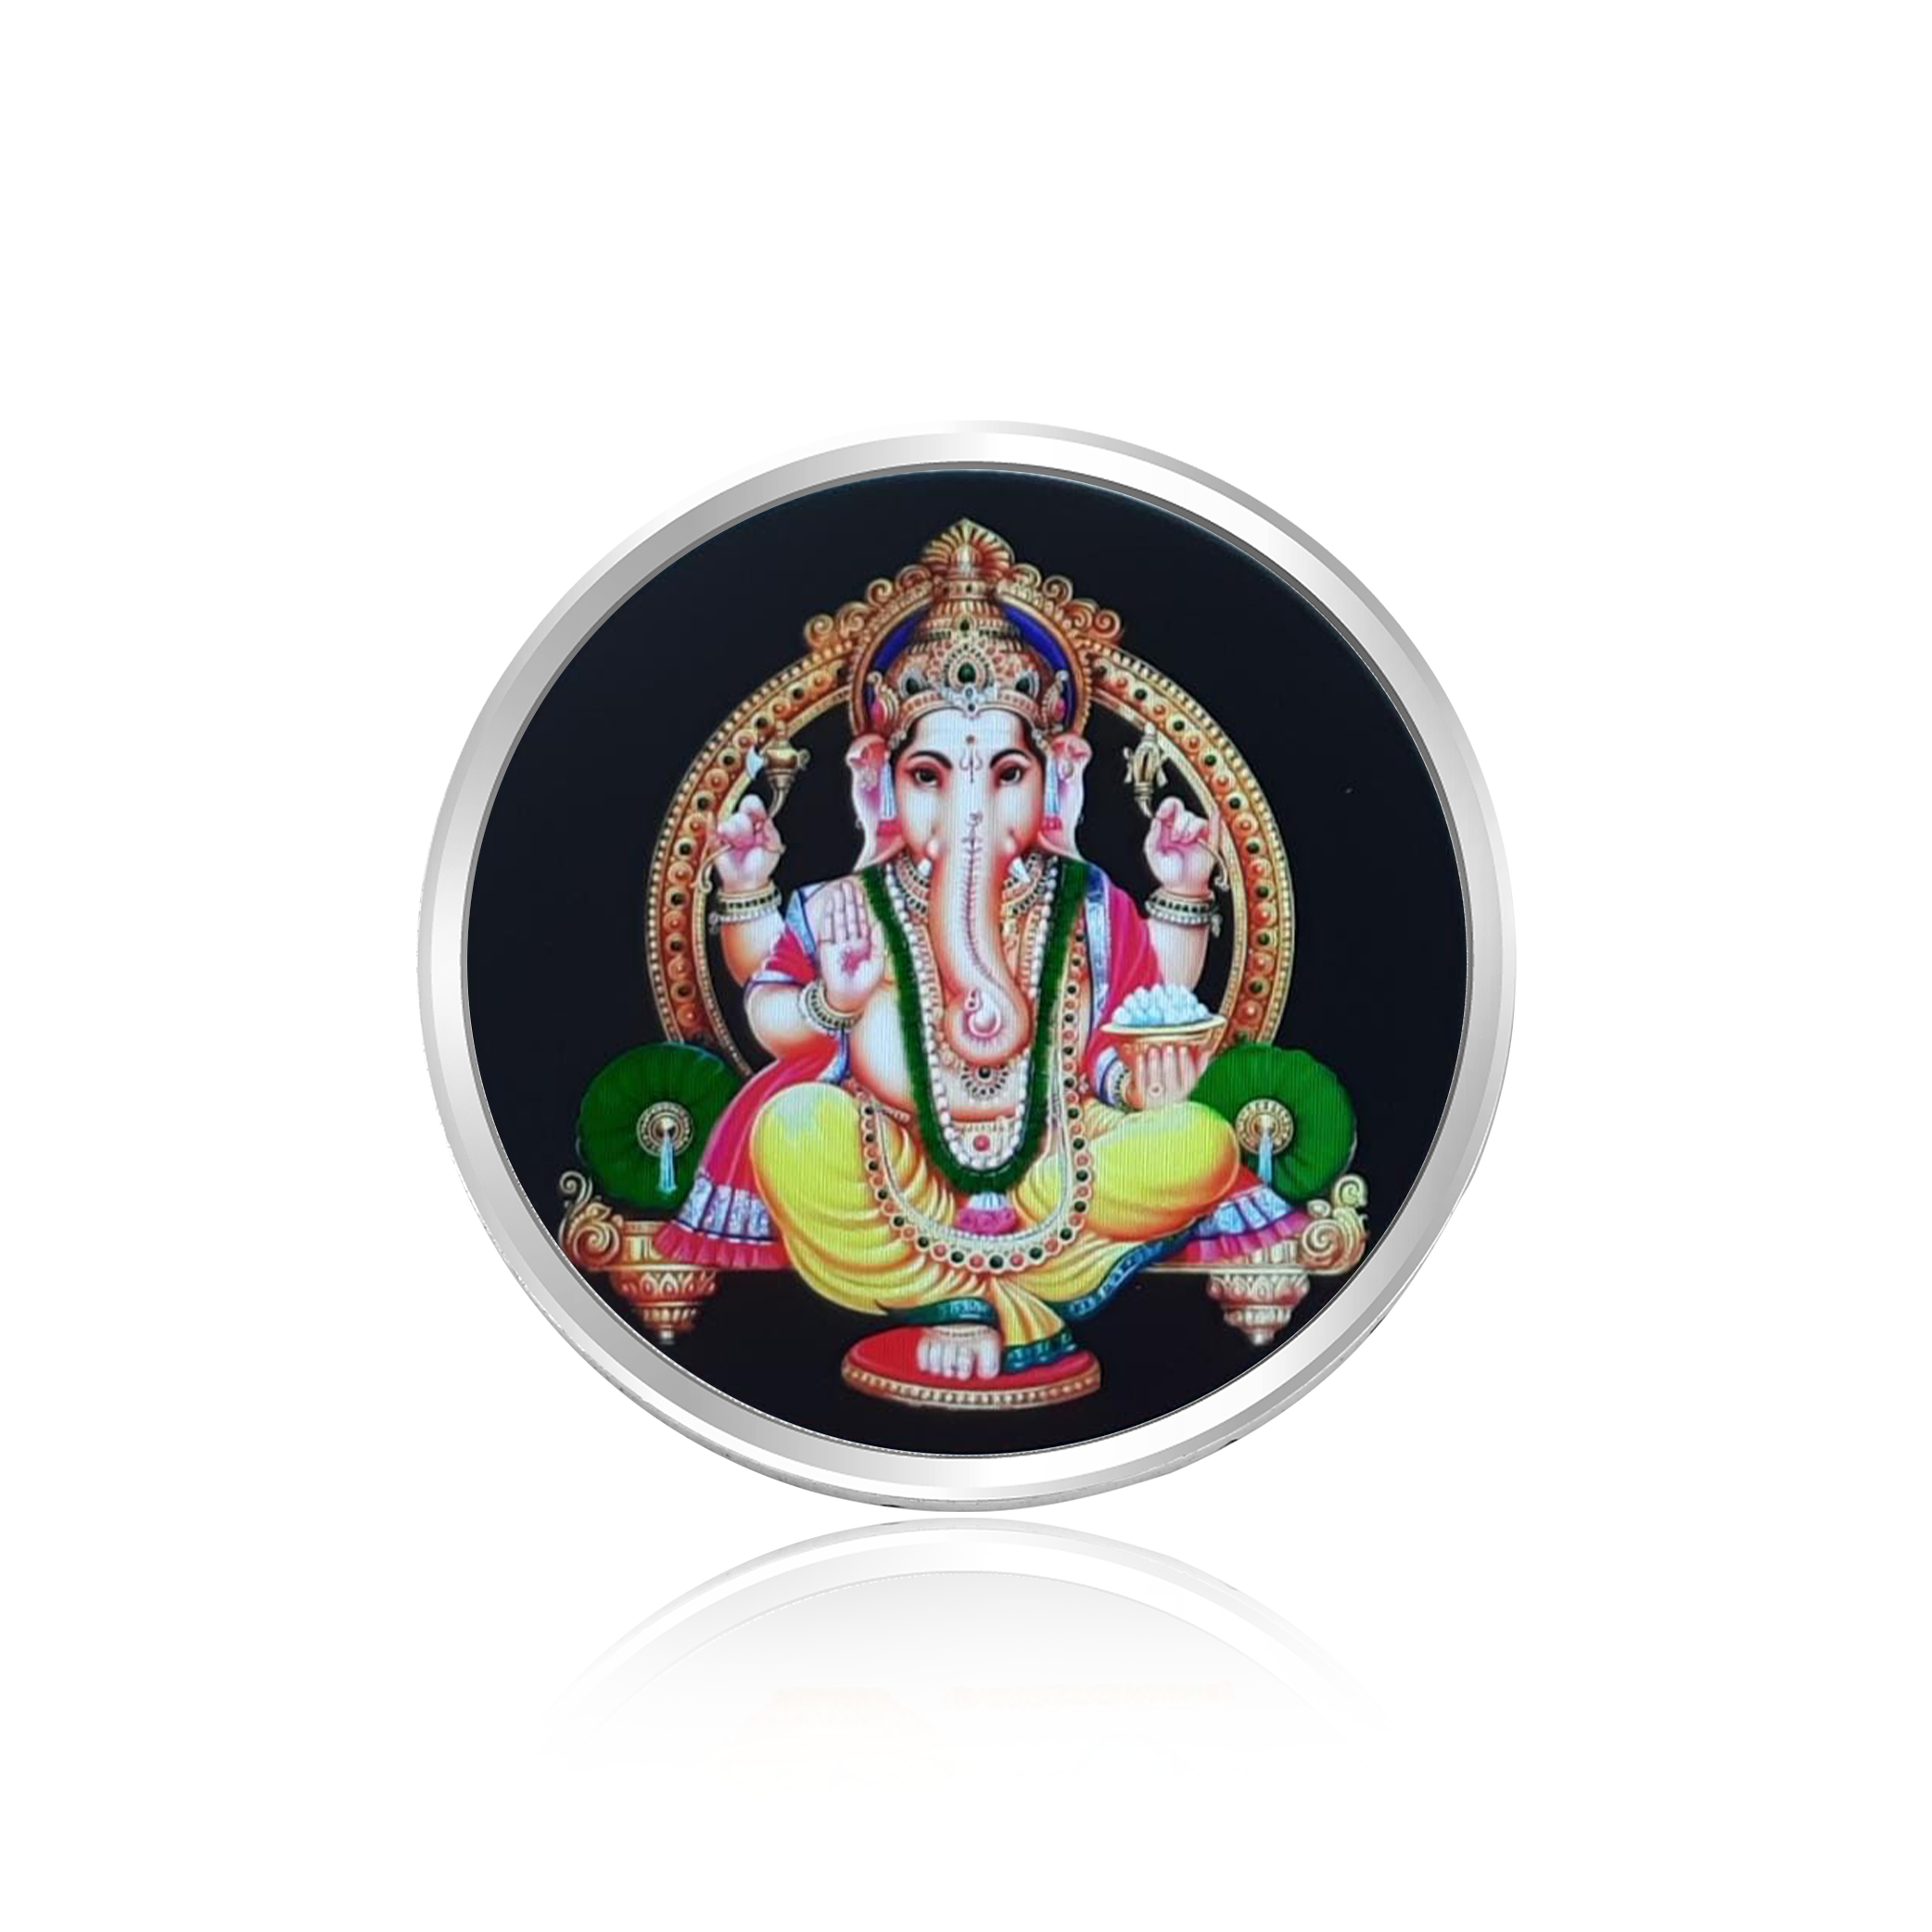 Divinely Crafted 10gms Ganesha Silver Coin